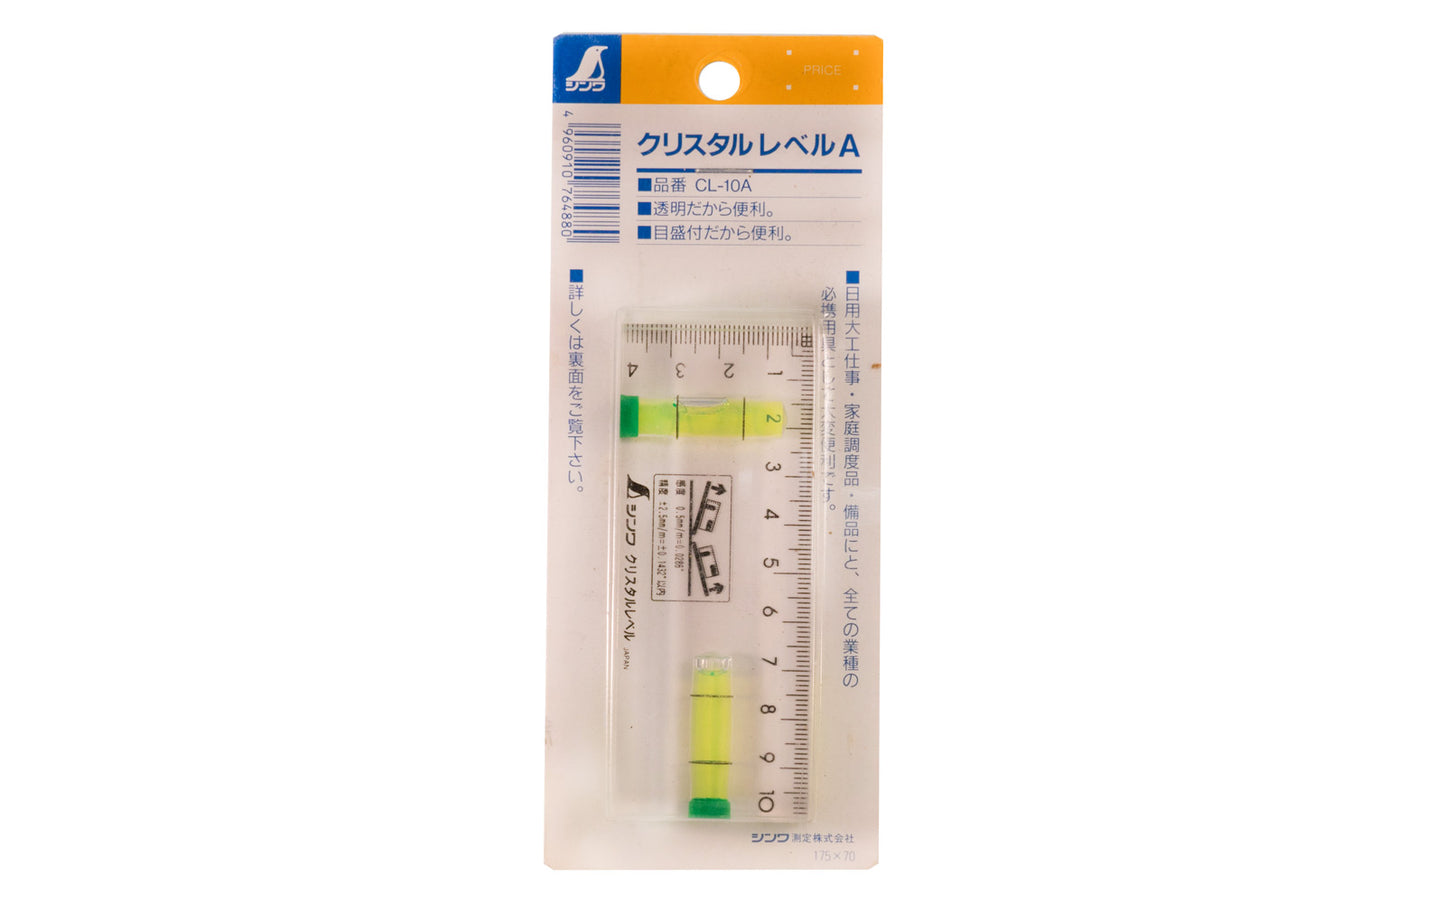 Shinwa Clear Mini Level with Vials. Made in Japan. 4960910764880. Model No. CL-10A